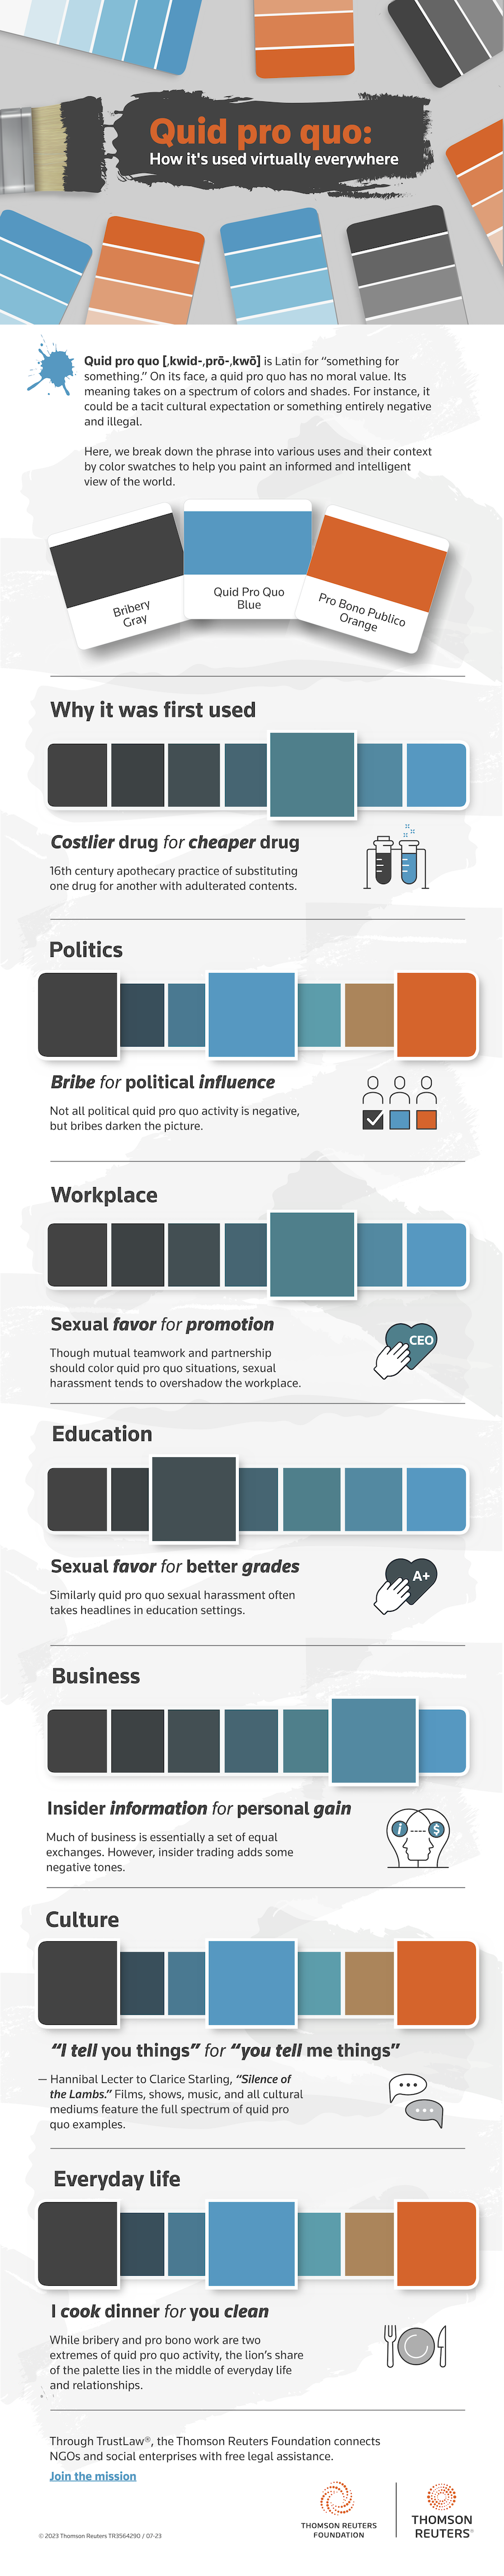 Infographic about quid pro quo with meaning and examples